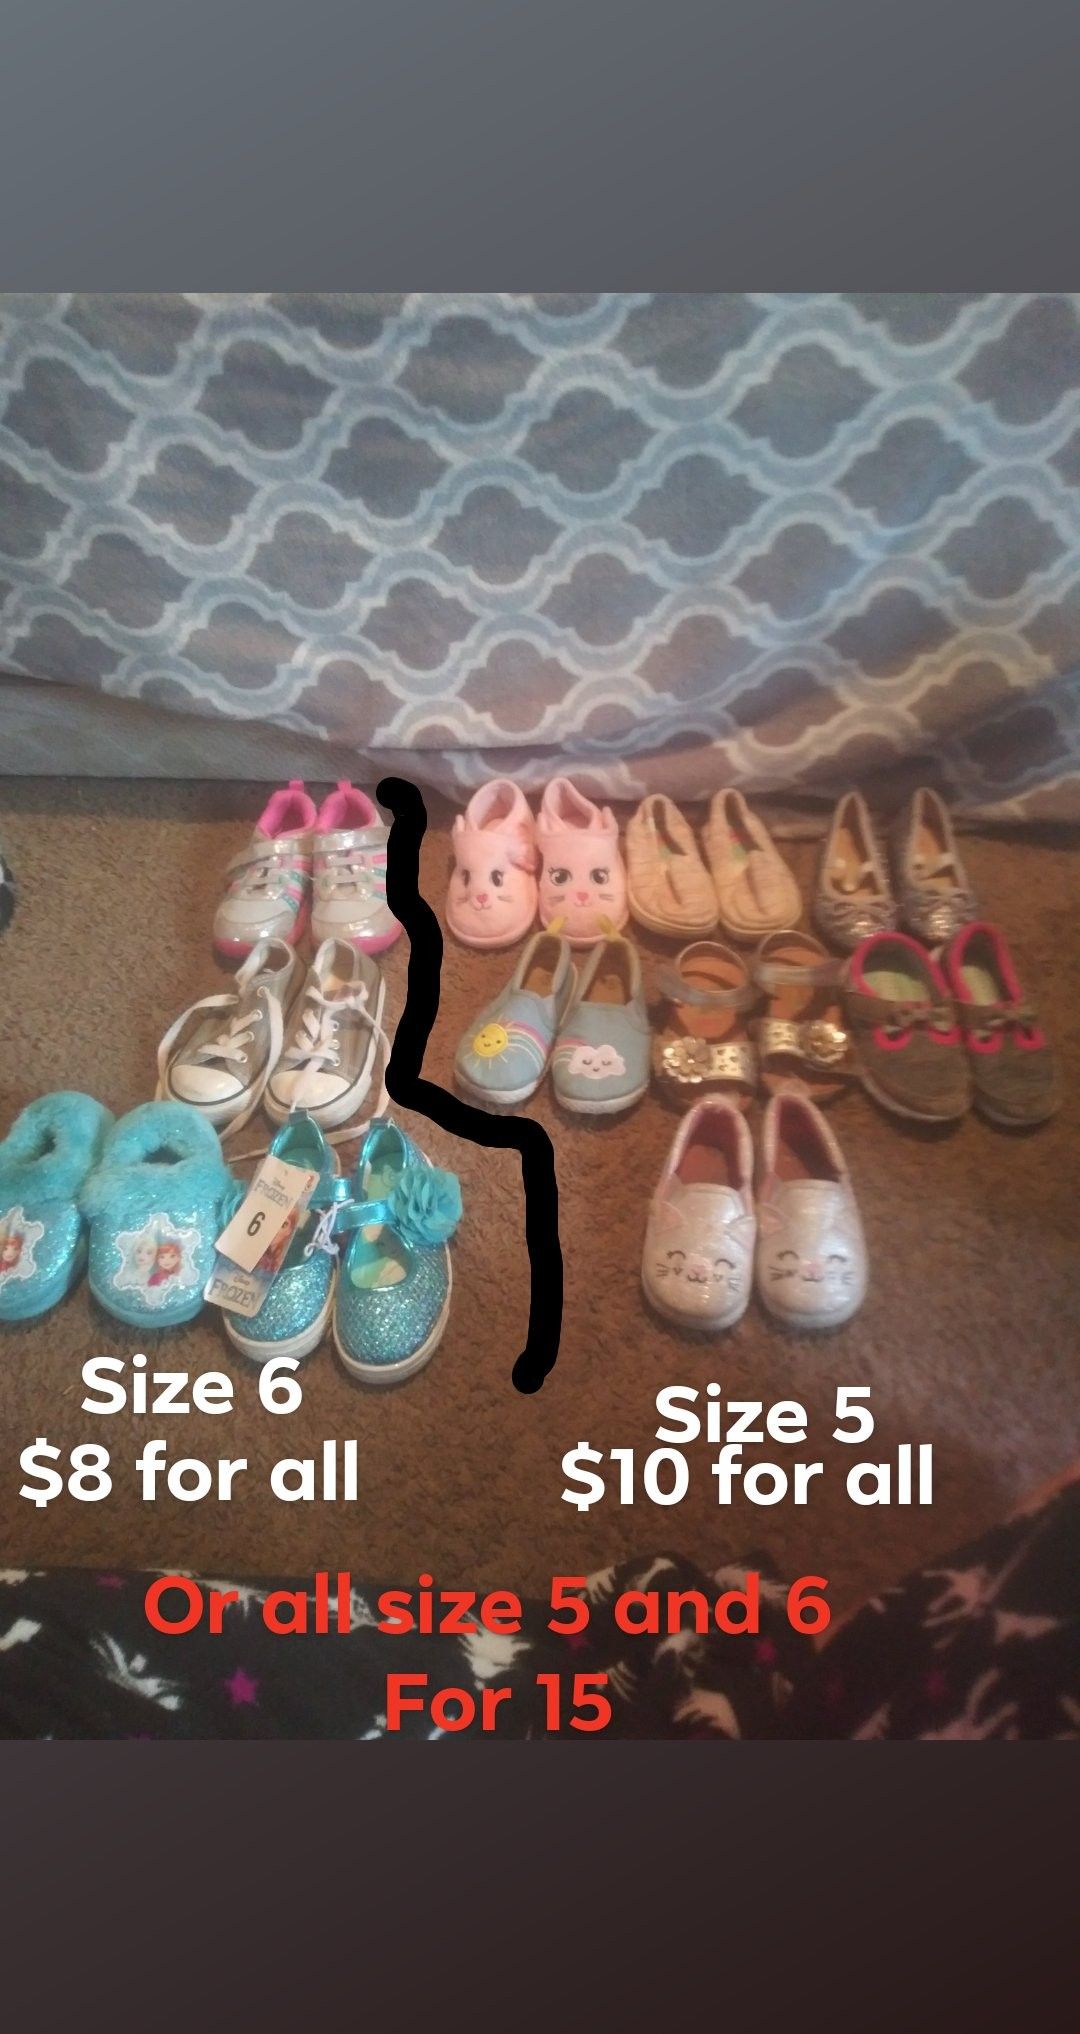 One pair of size 4 lots of size 5 in size 6 shoes